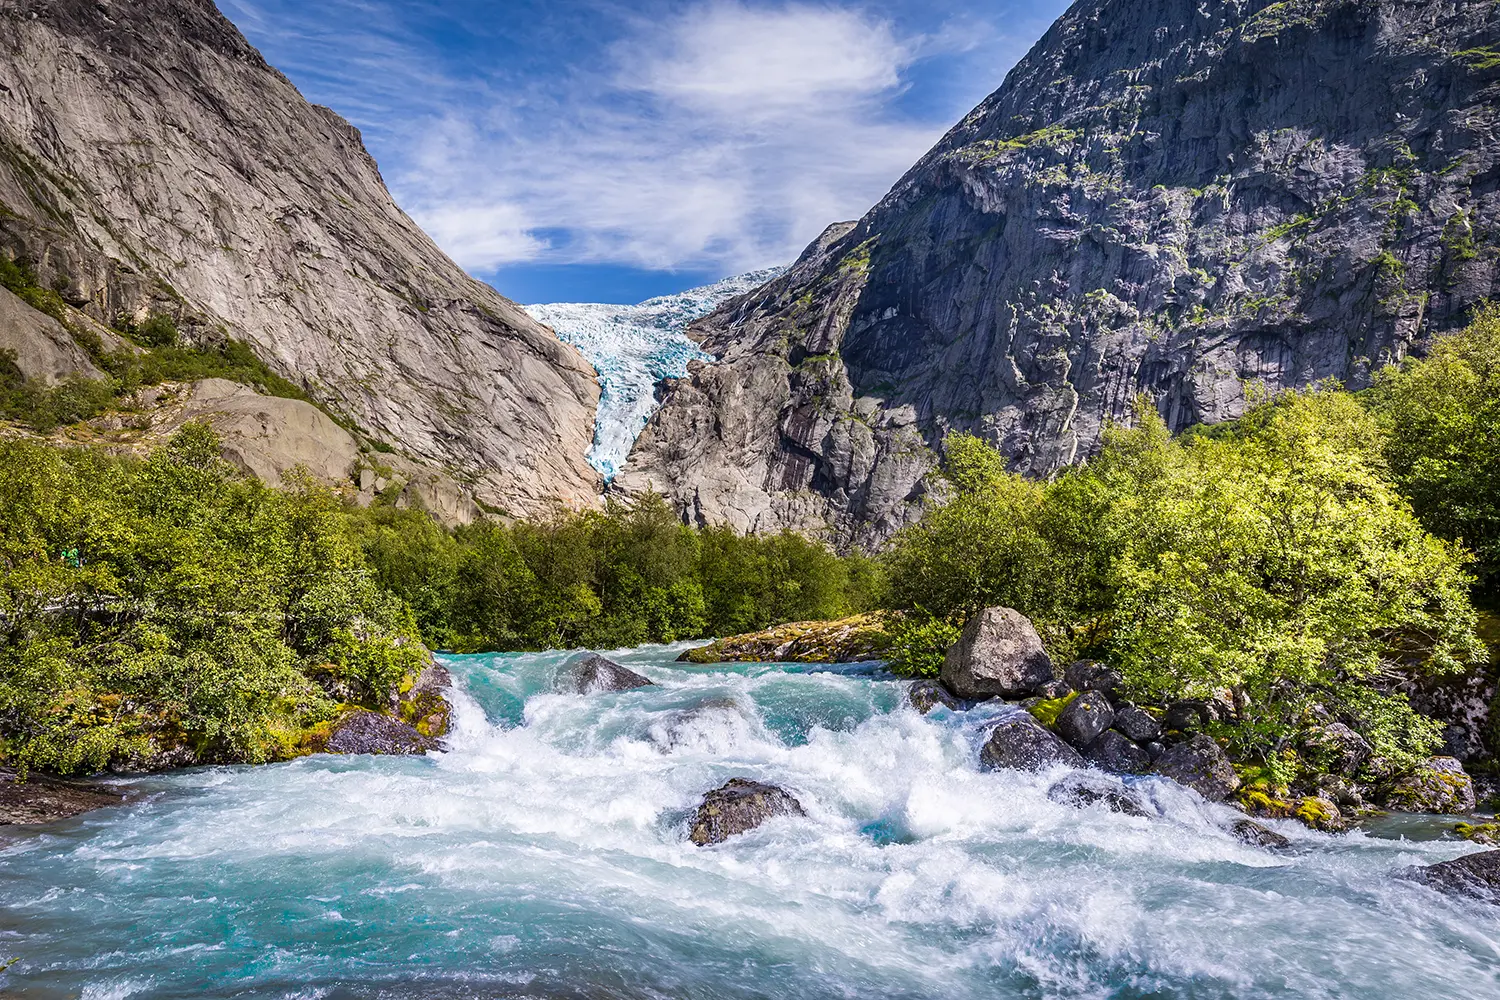 Briksdal glacier in Norway well known arm of the large Jostedalsbreen glacier in Oldedalen valley in Norway, Scandinavia.